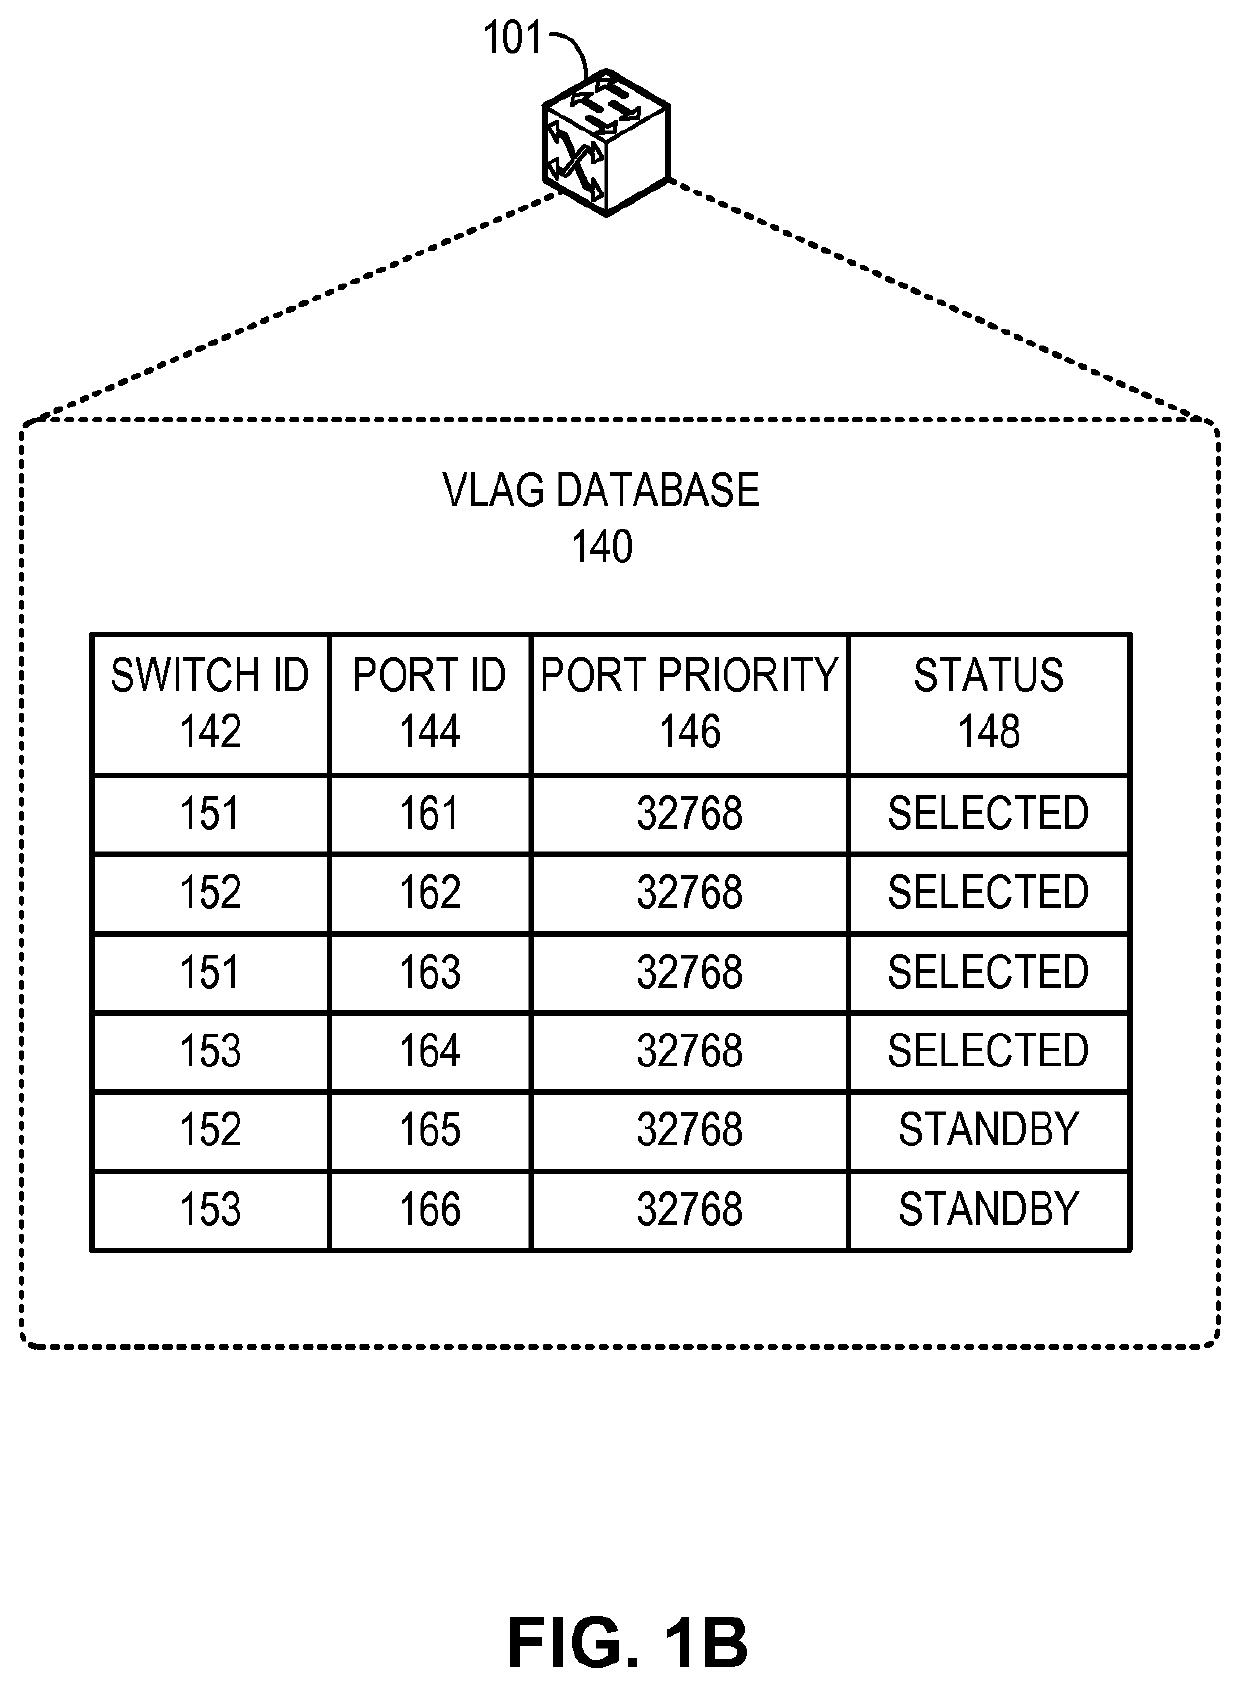 Distributed hot standby links for vLAG